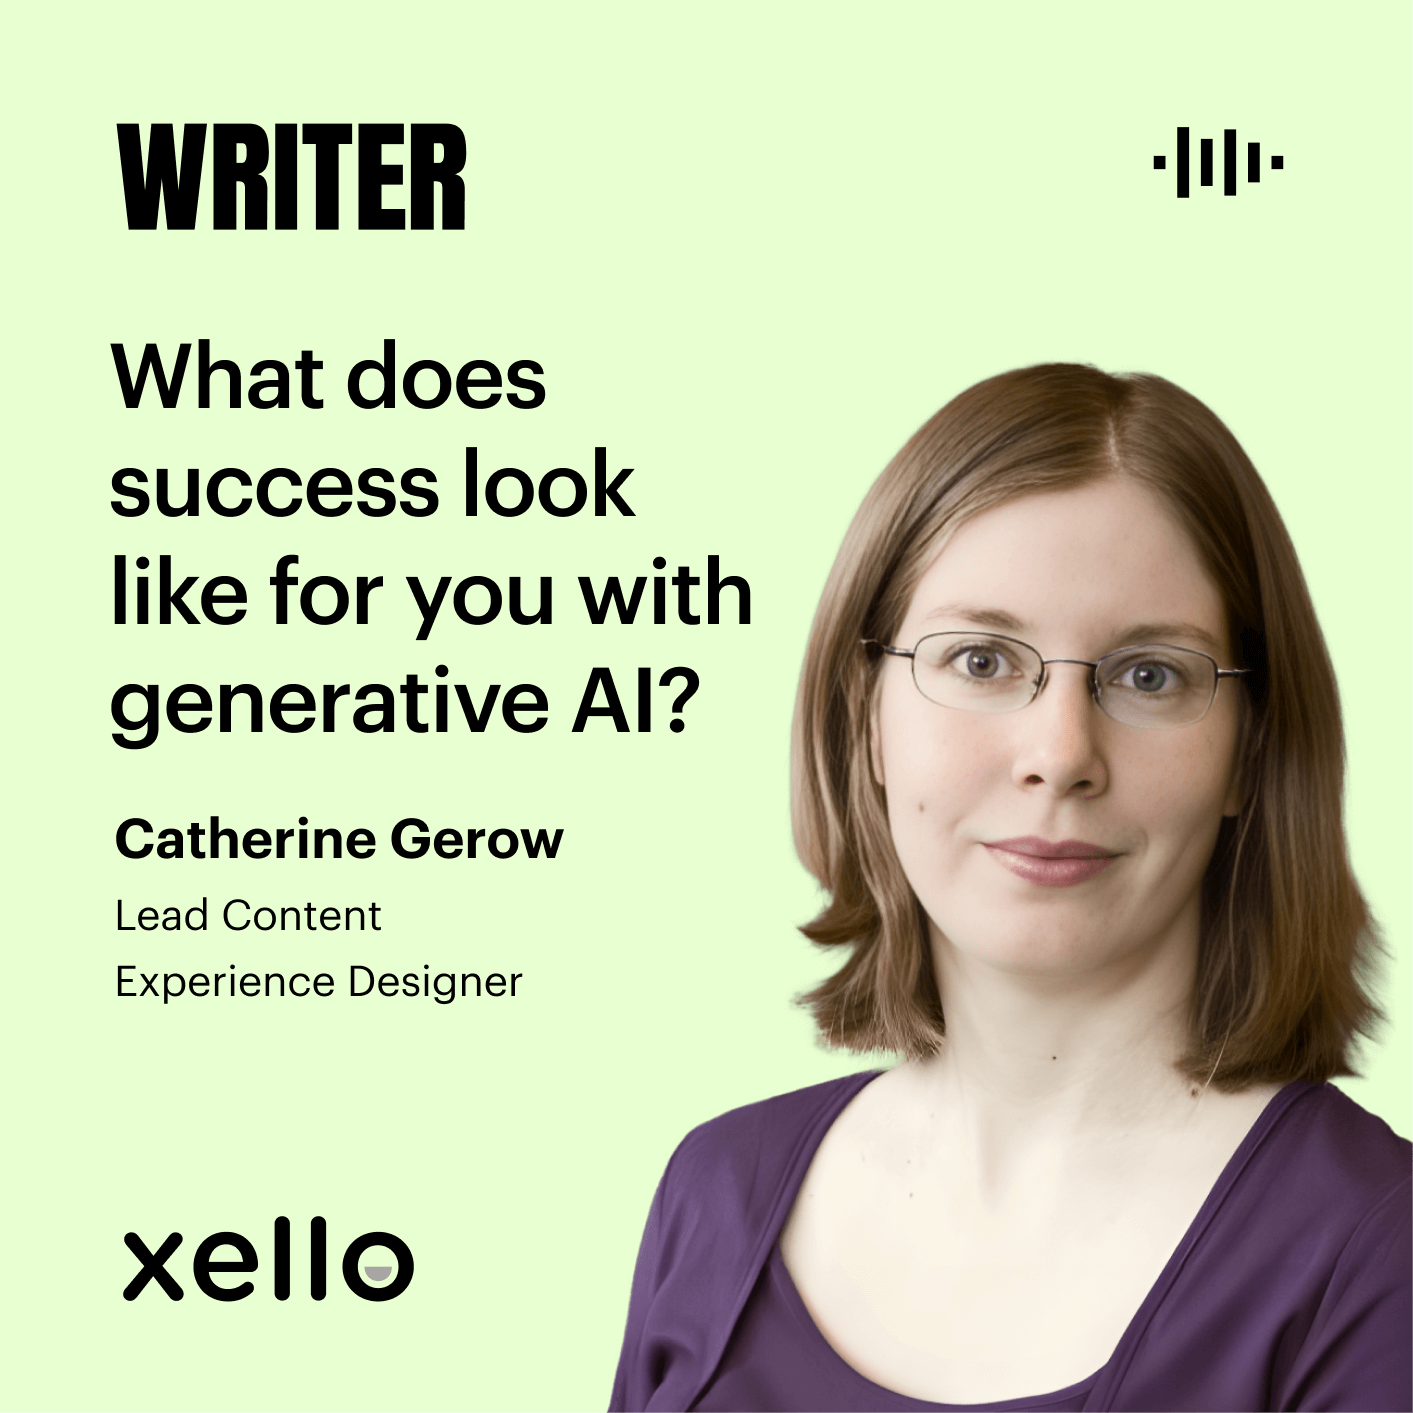 What does success look like for you with generative AI?